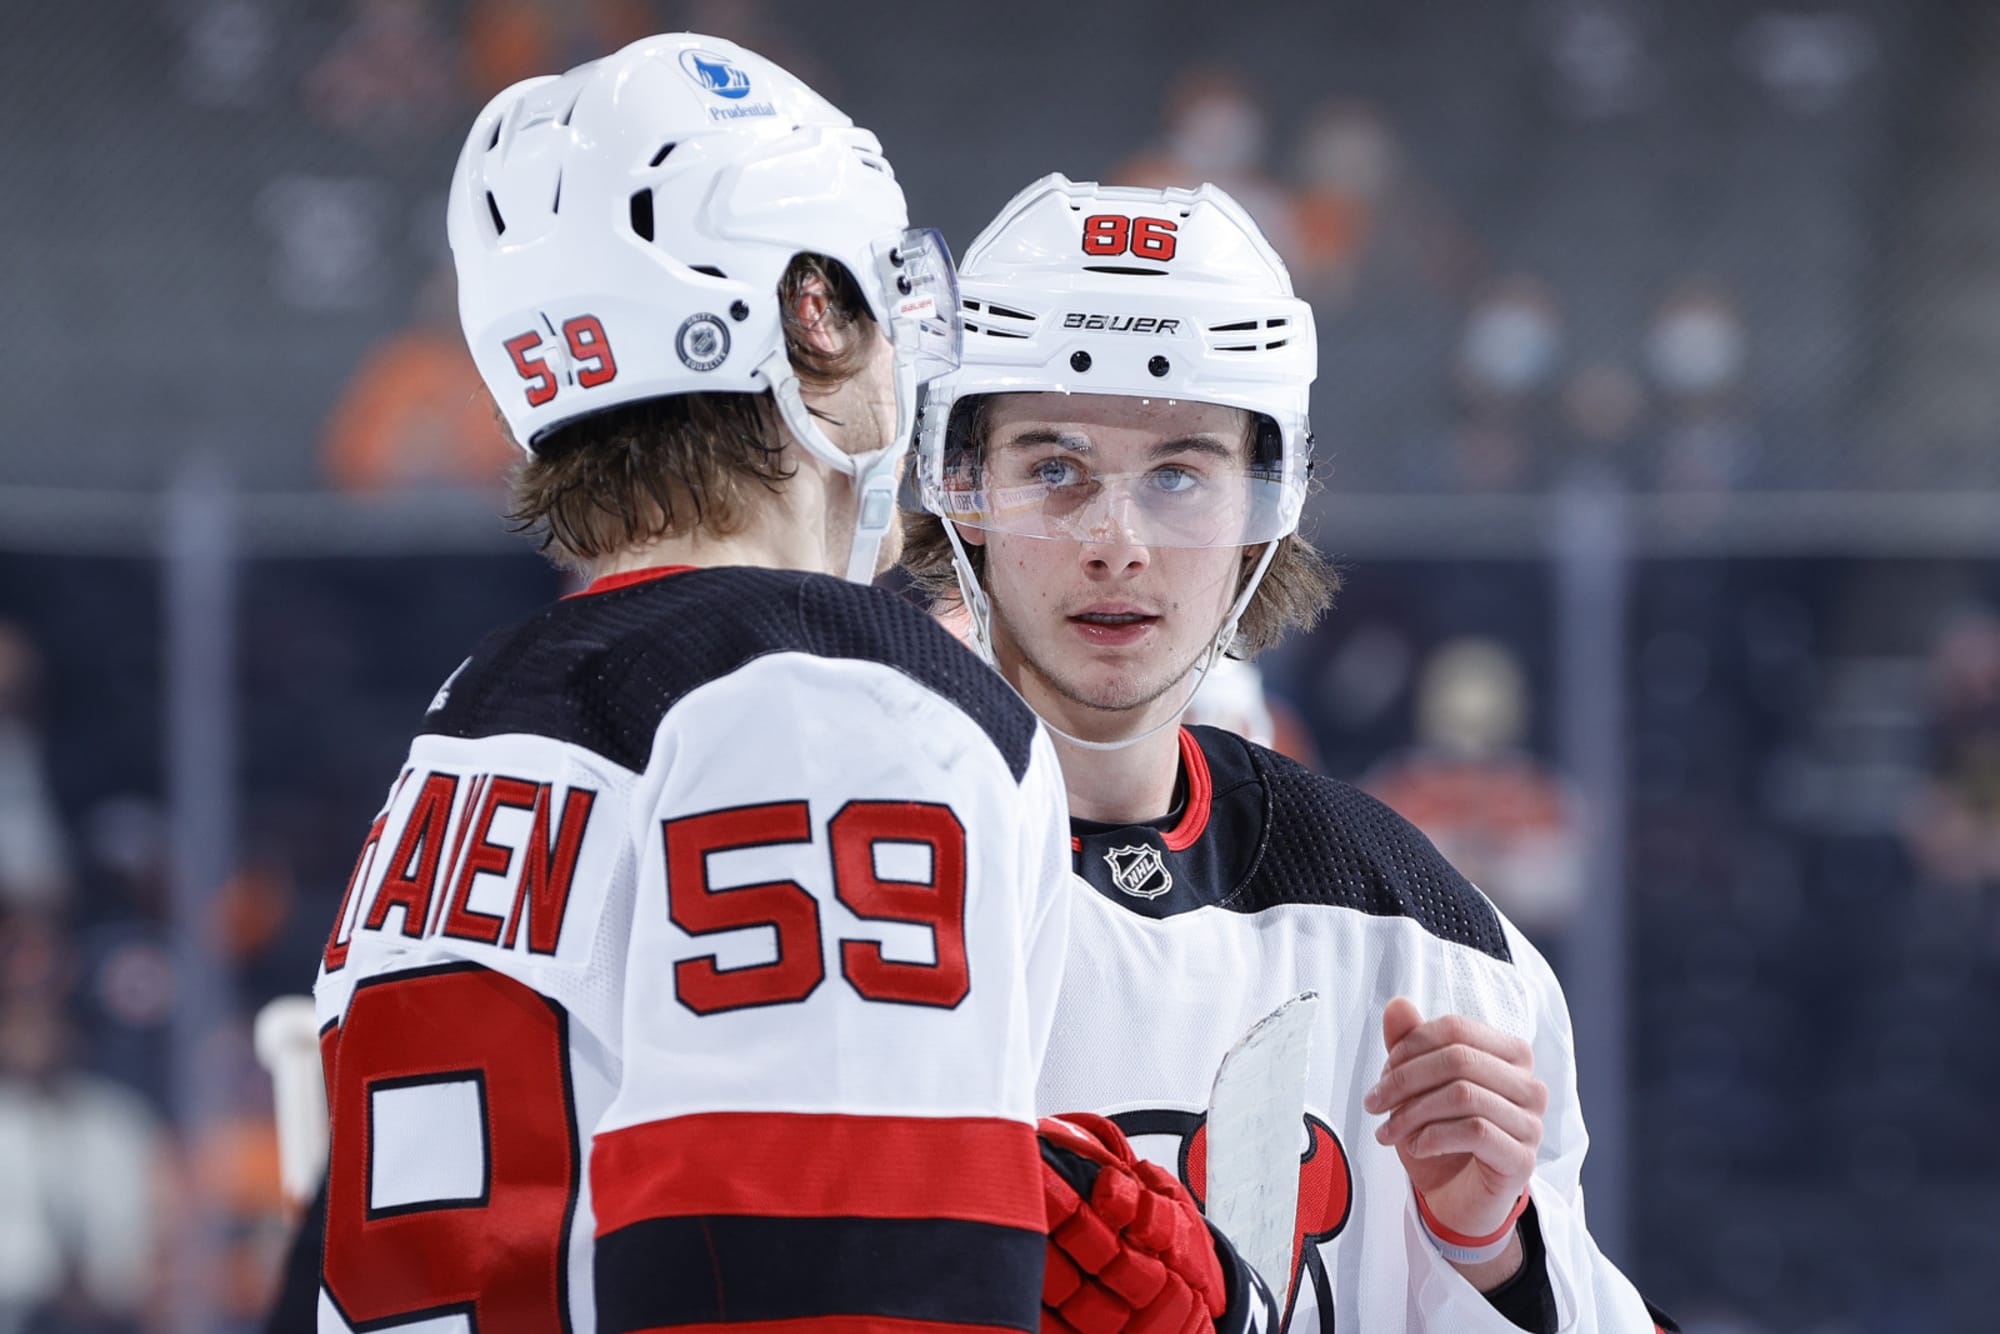 Can Artemi Panarin crack the 100 point mark this season with New